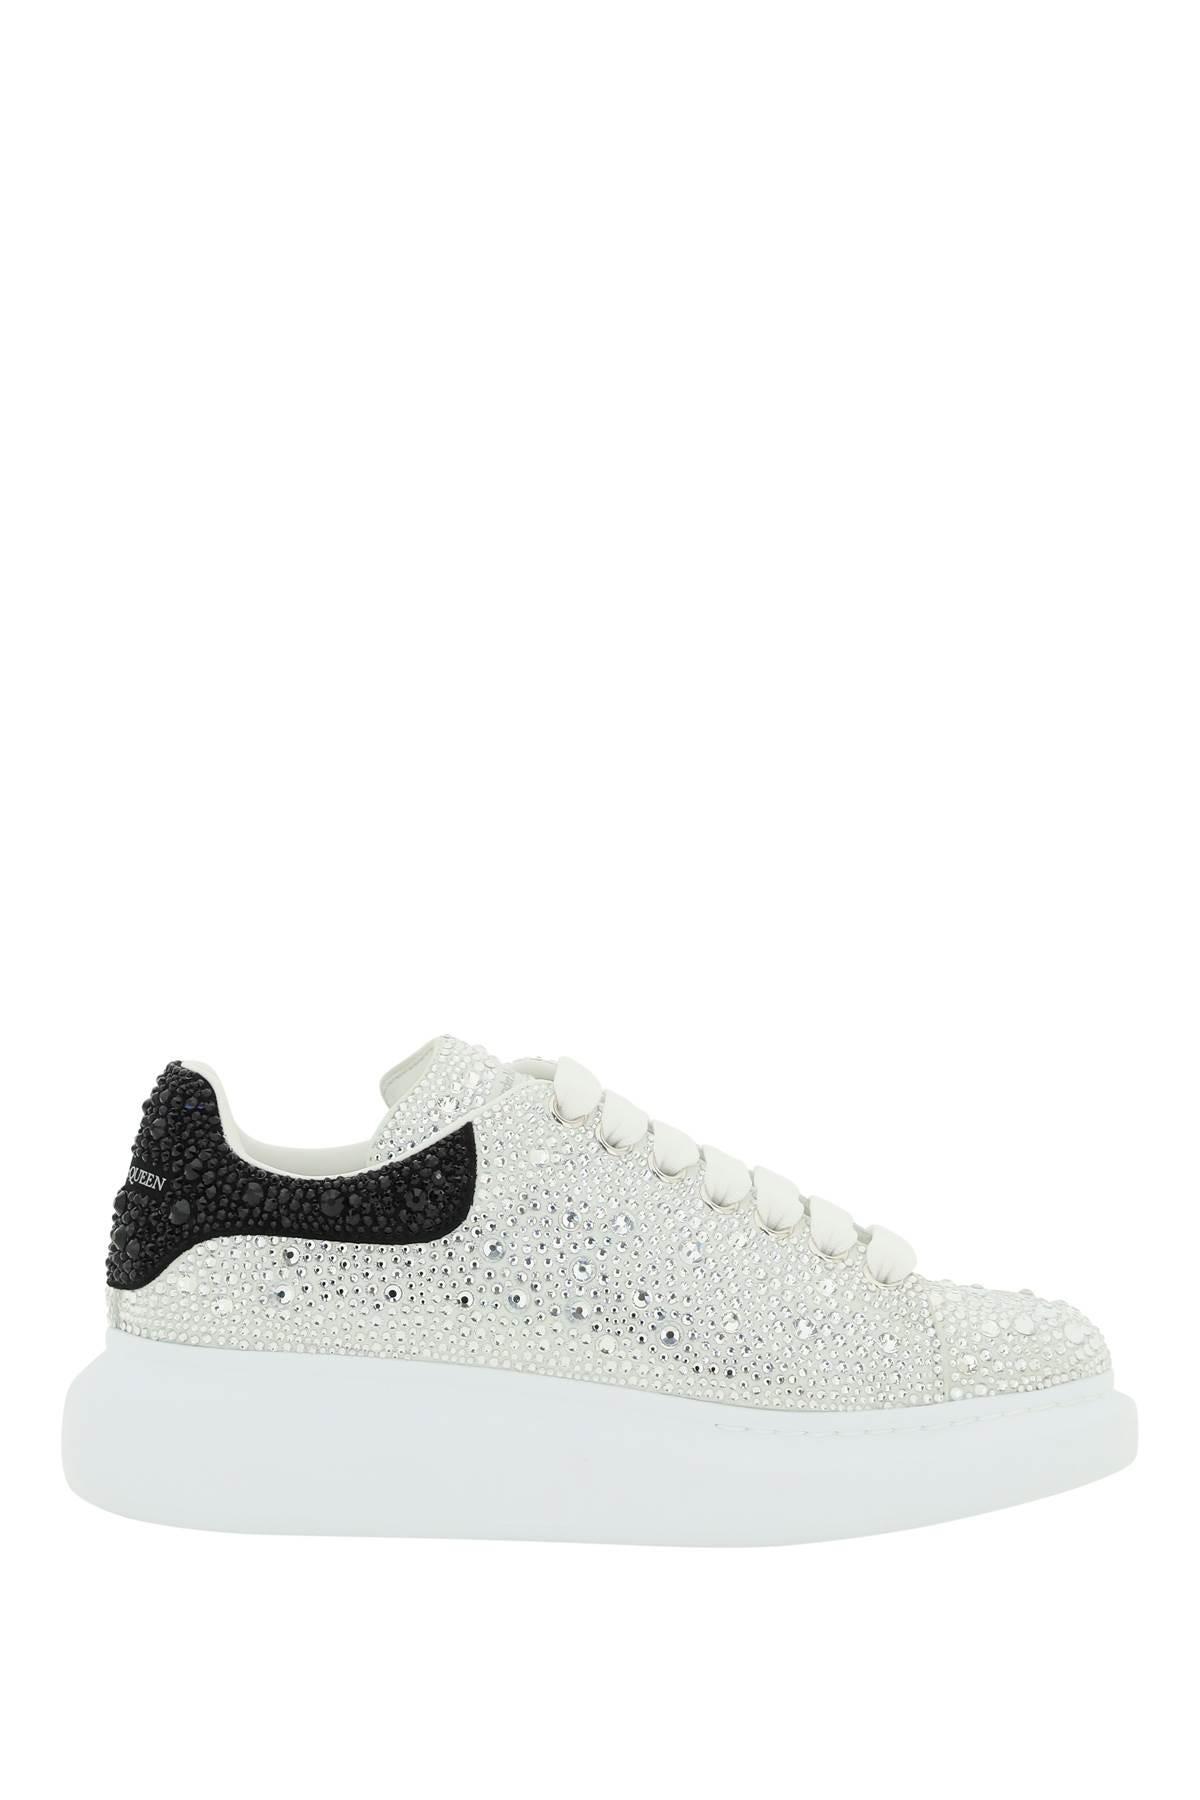 Alexander McQueen Oversized Sneakers With Crystals in White | Lyst